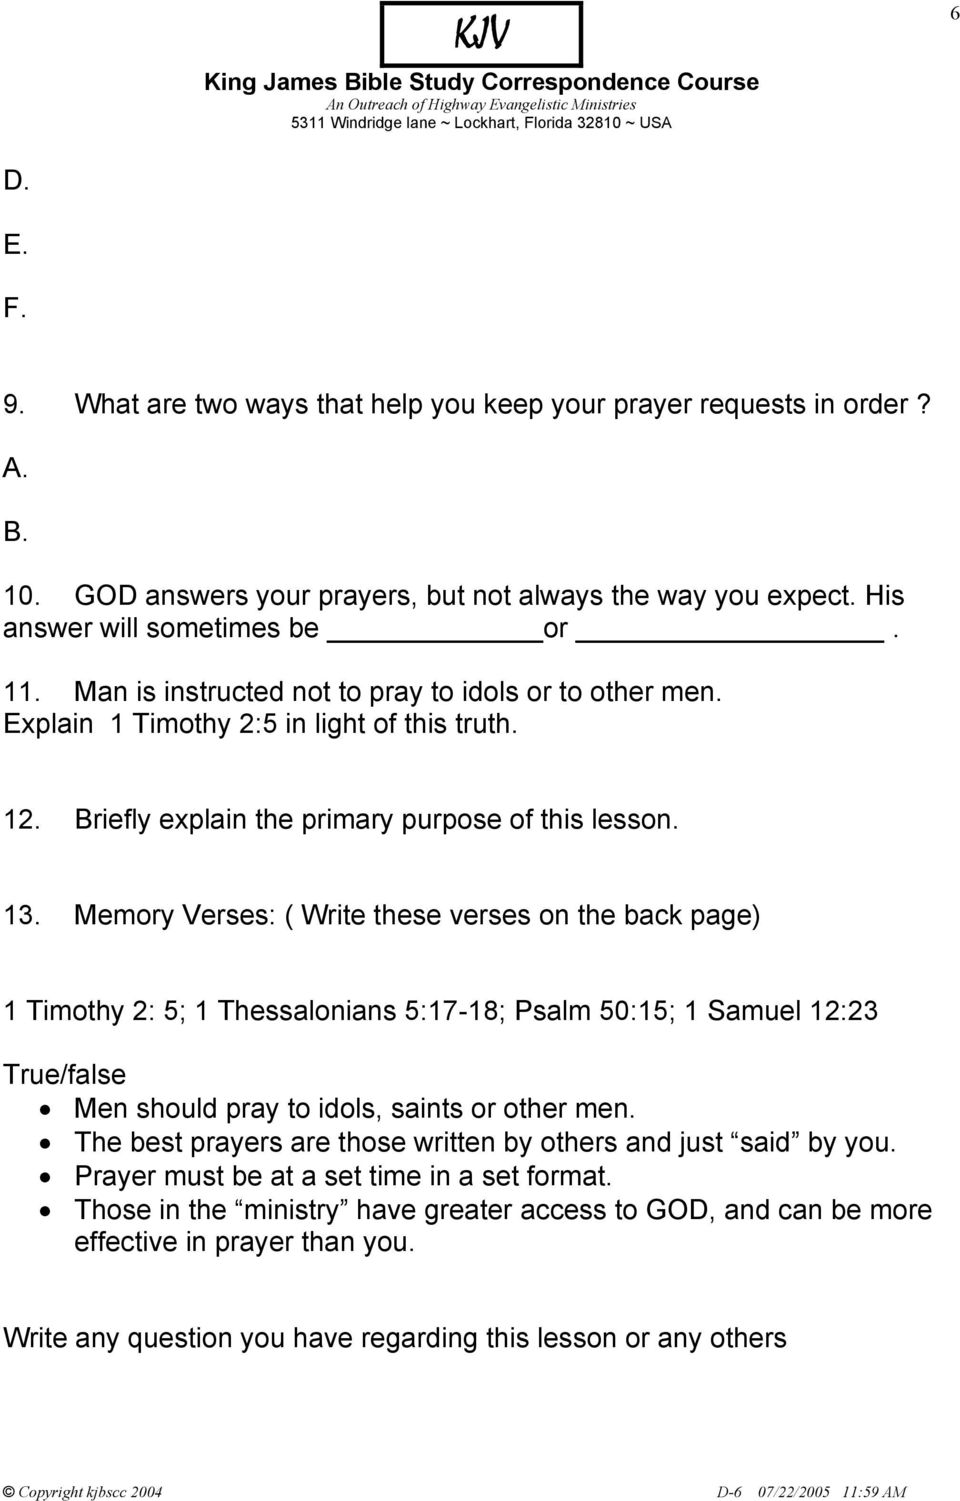 Memory Verses: ( Write these verses on the back page) 1 Timothy 2: 5; 1 Thessalonians 5:17-18; Psalm 50:15; 1 Samuel 12:23 True/false Men should pray to idols, saints or other men.